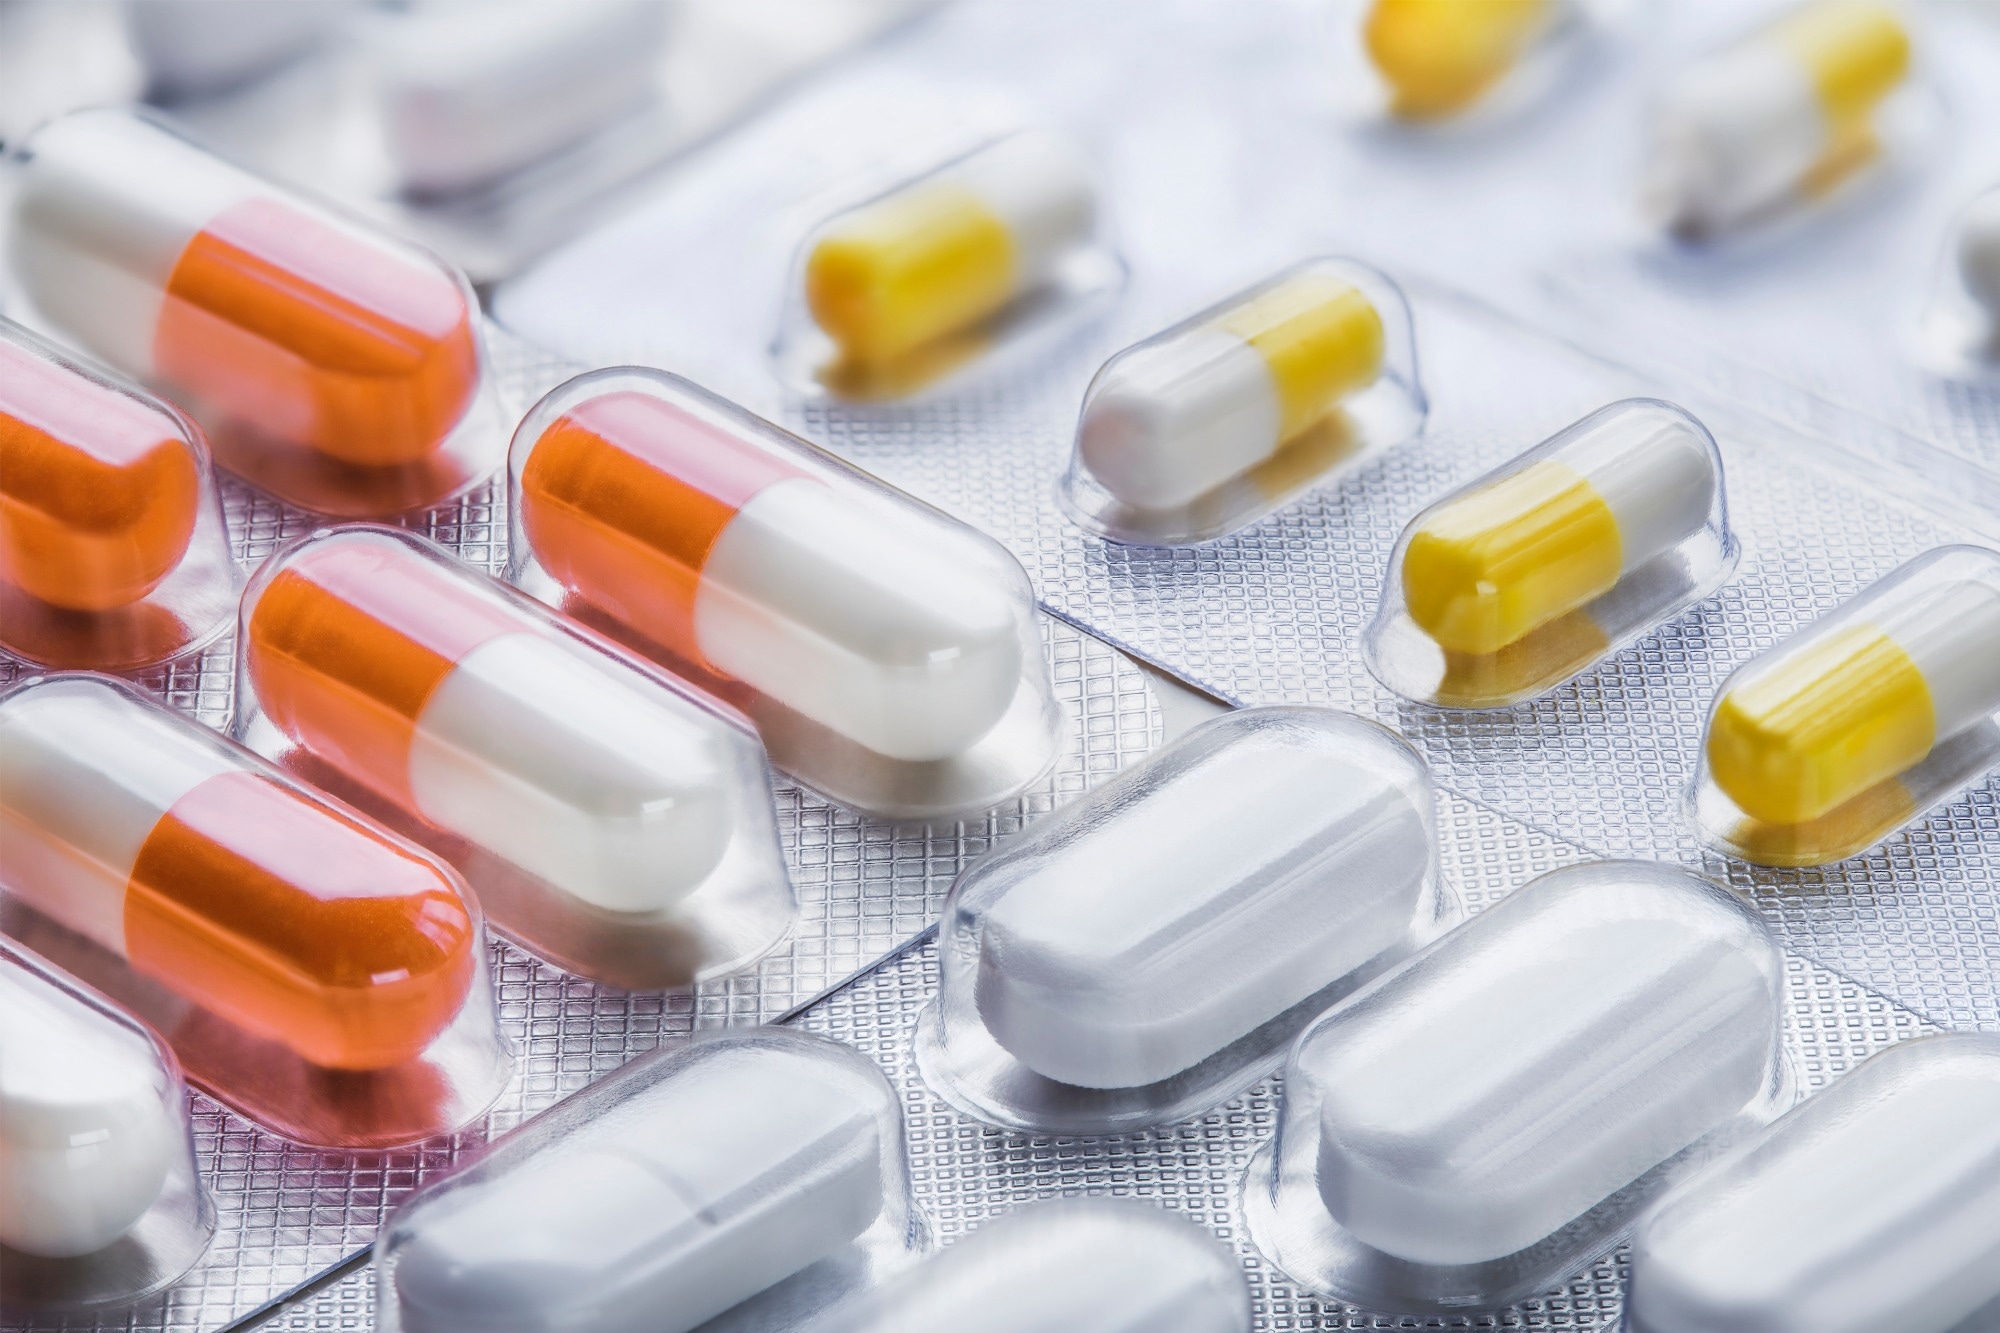 Study: Inappropriate antibiotic prescribing and its determinants among outpatient children in 3 low- and middle-income countries: A multicentric community-based cohort study. Image Credit: okskaz / Shutterstock